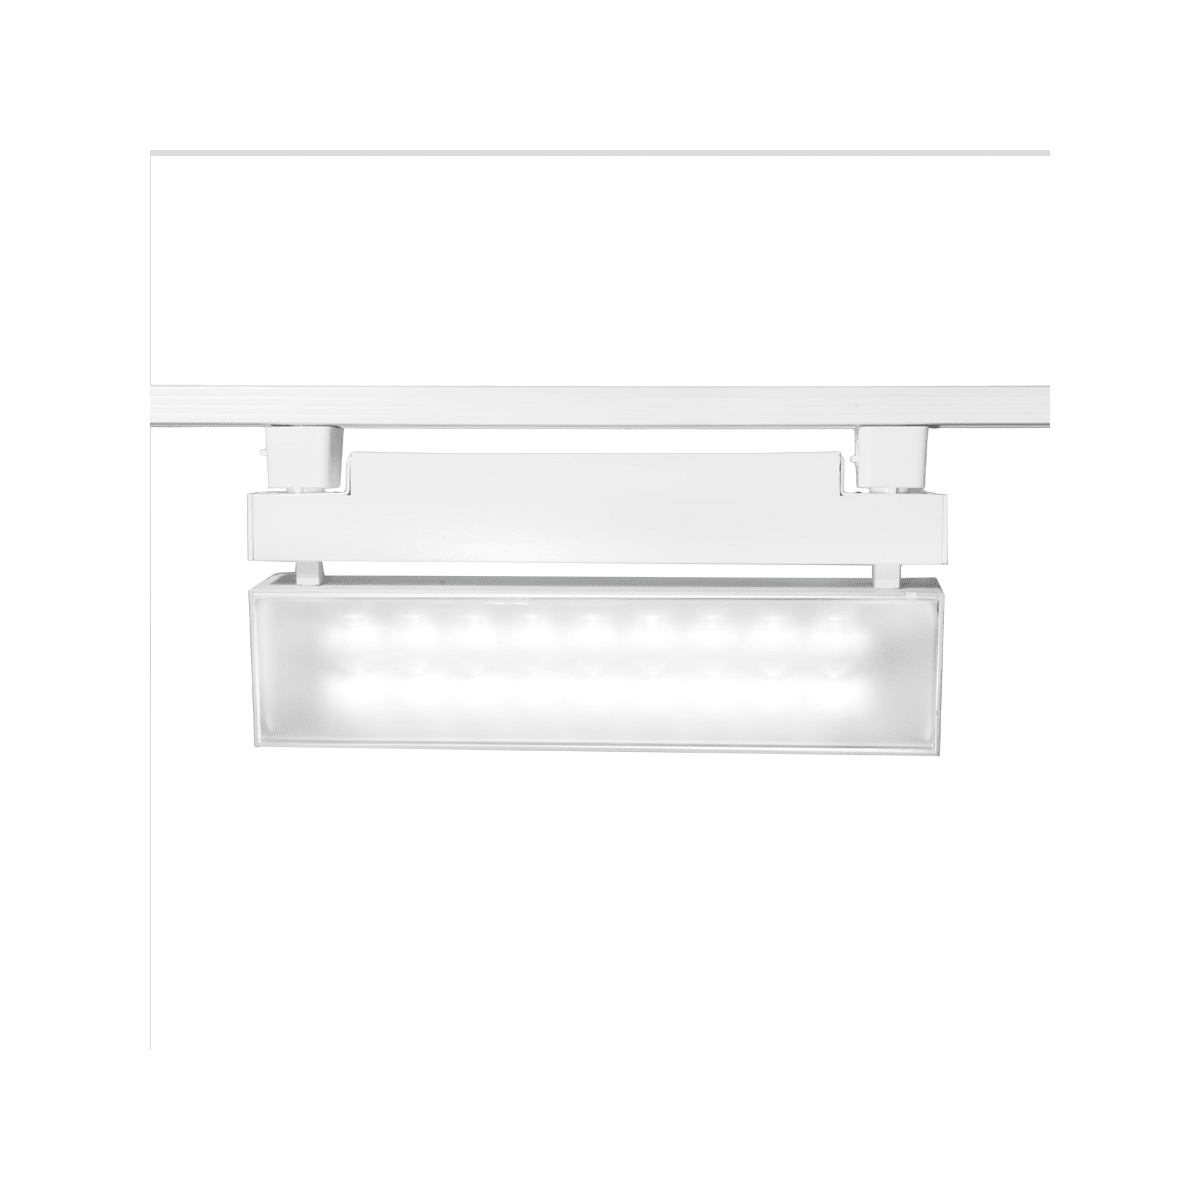 WAC Lighting L-3020W-30-WT LED3020 Wall Wash Head in White for L Track - 3